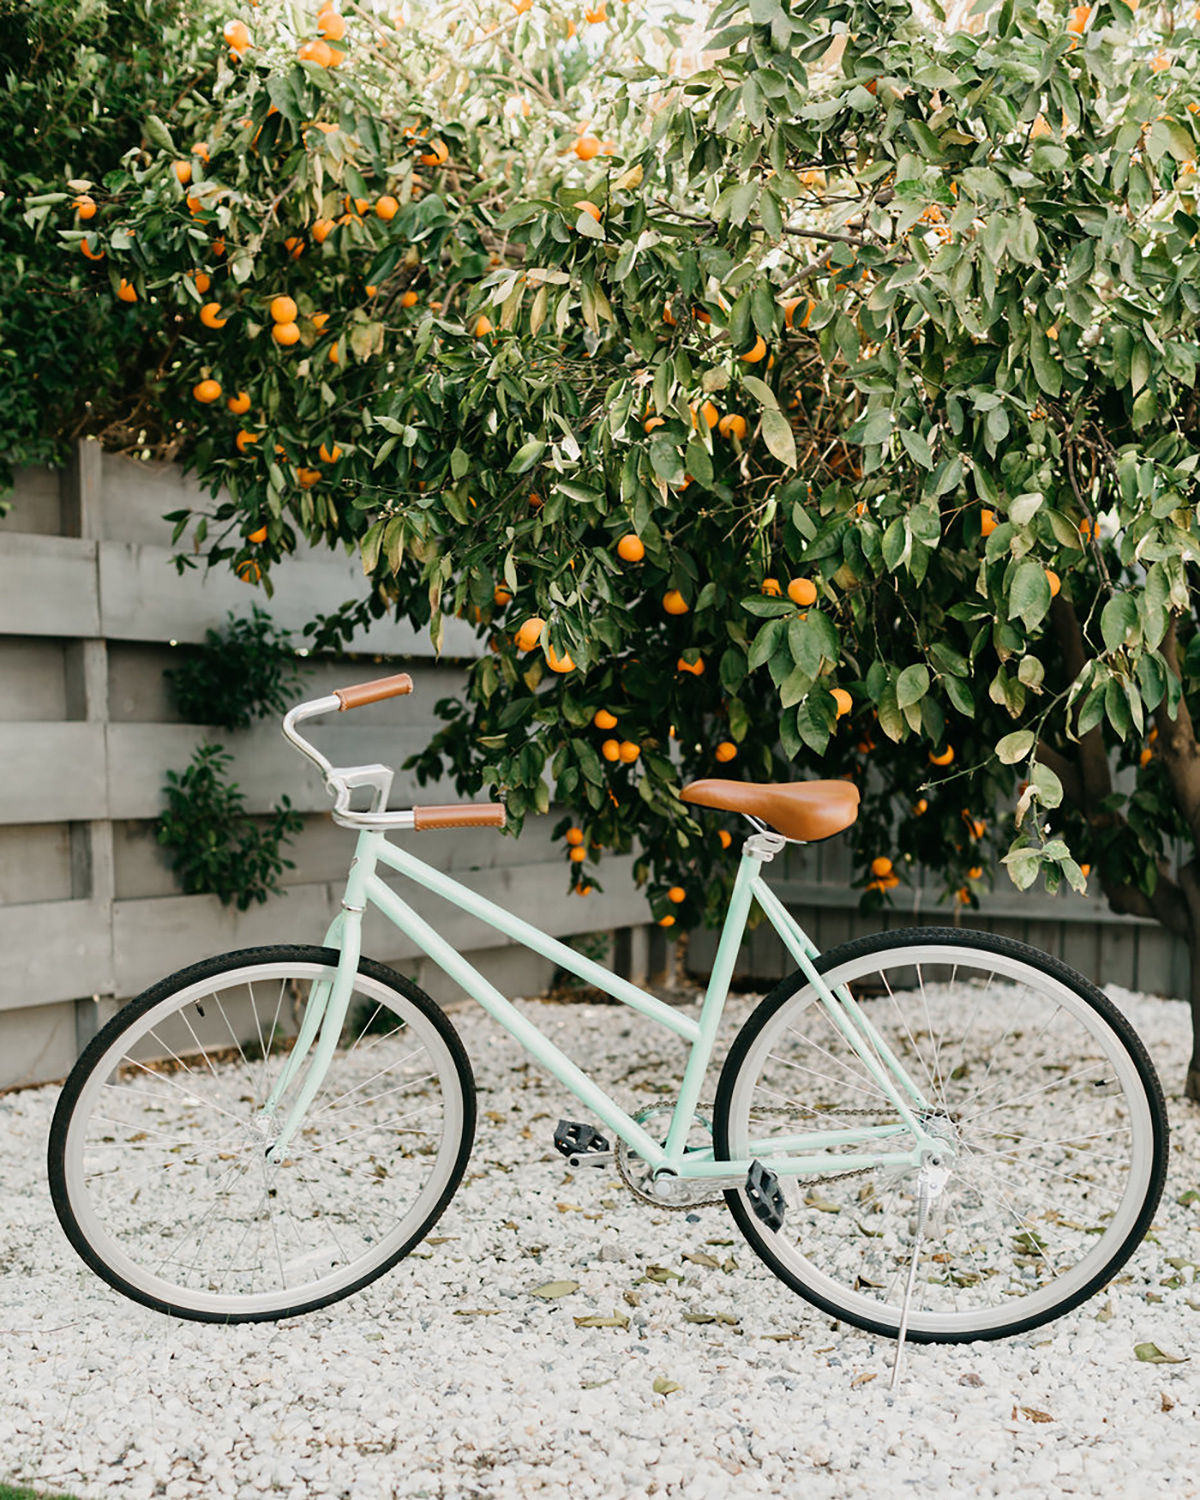 mint green bike with leather seat in front of an orange bush